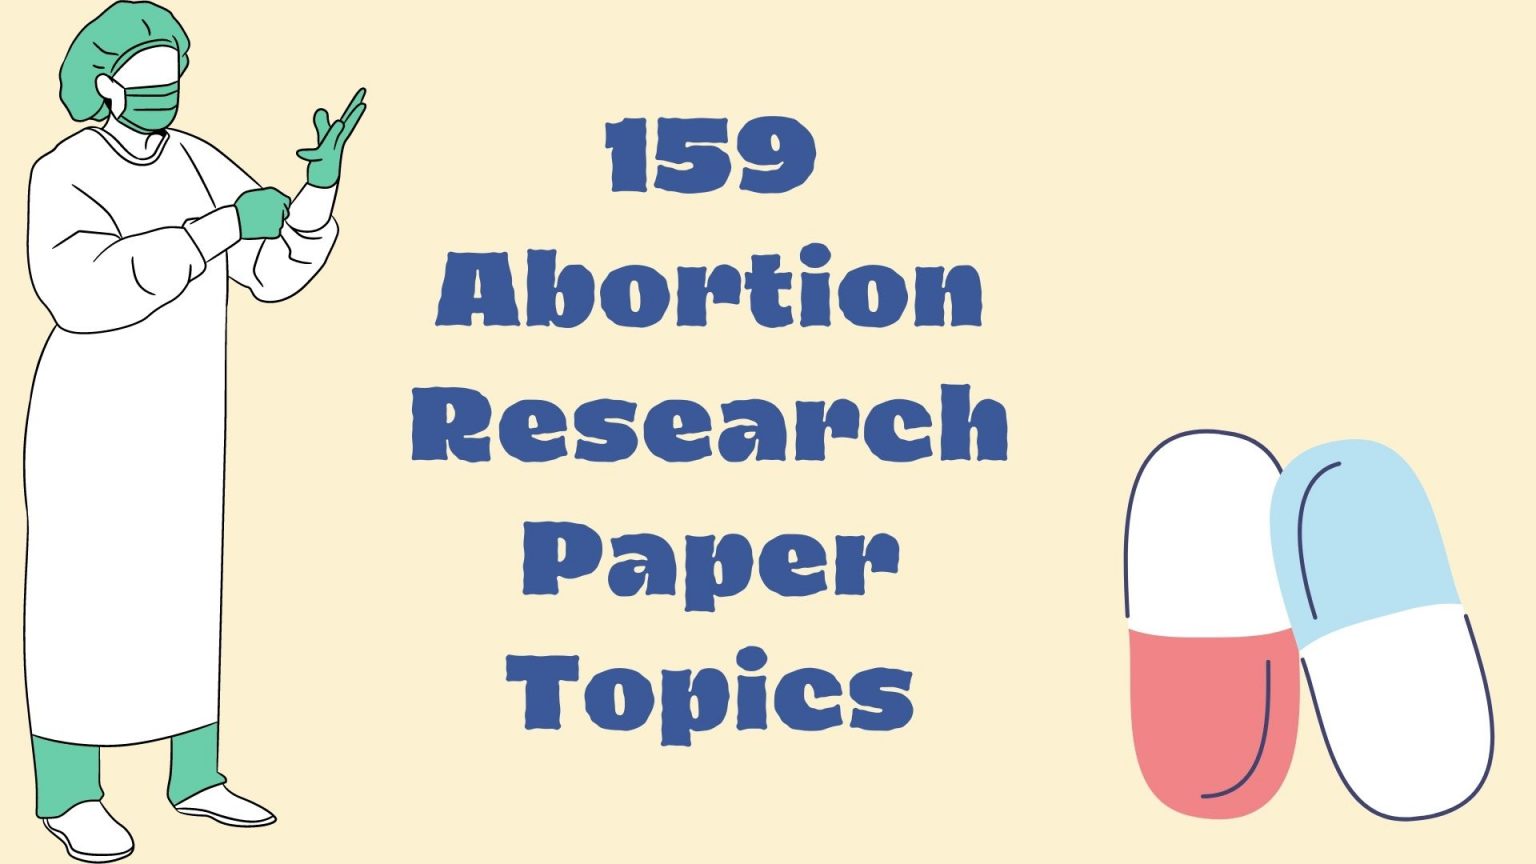 abortion research paper topics